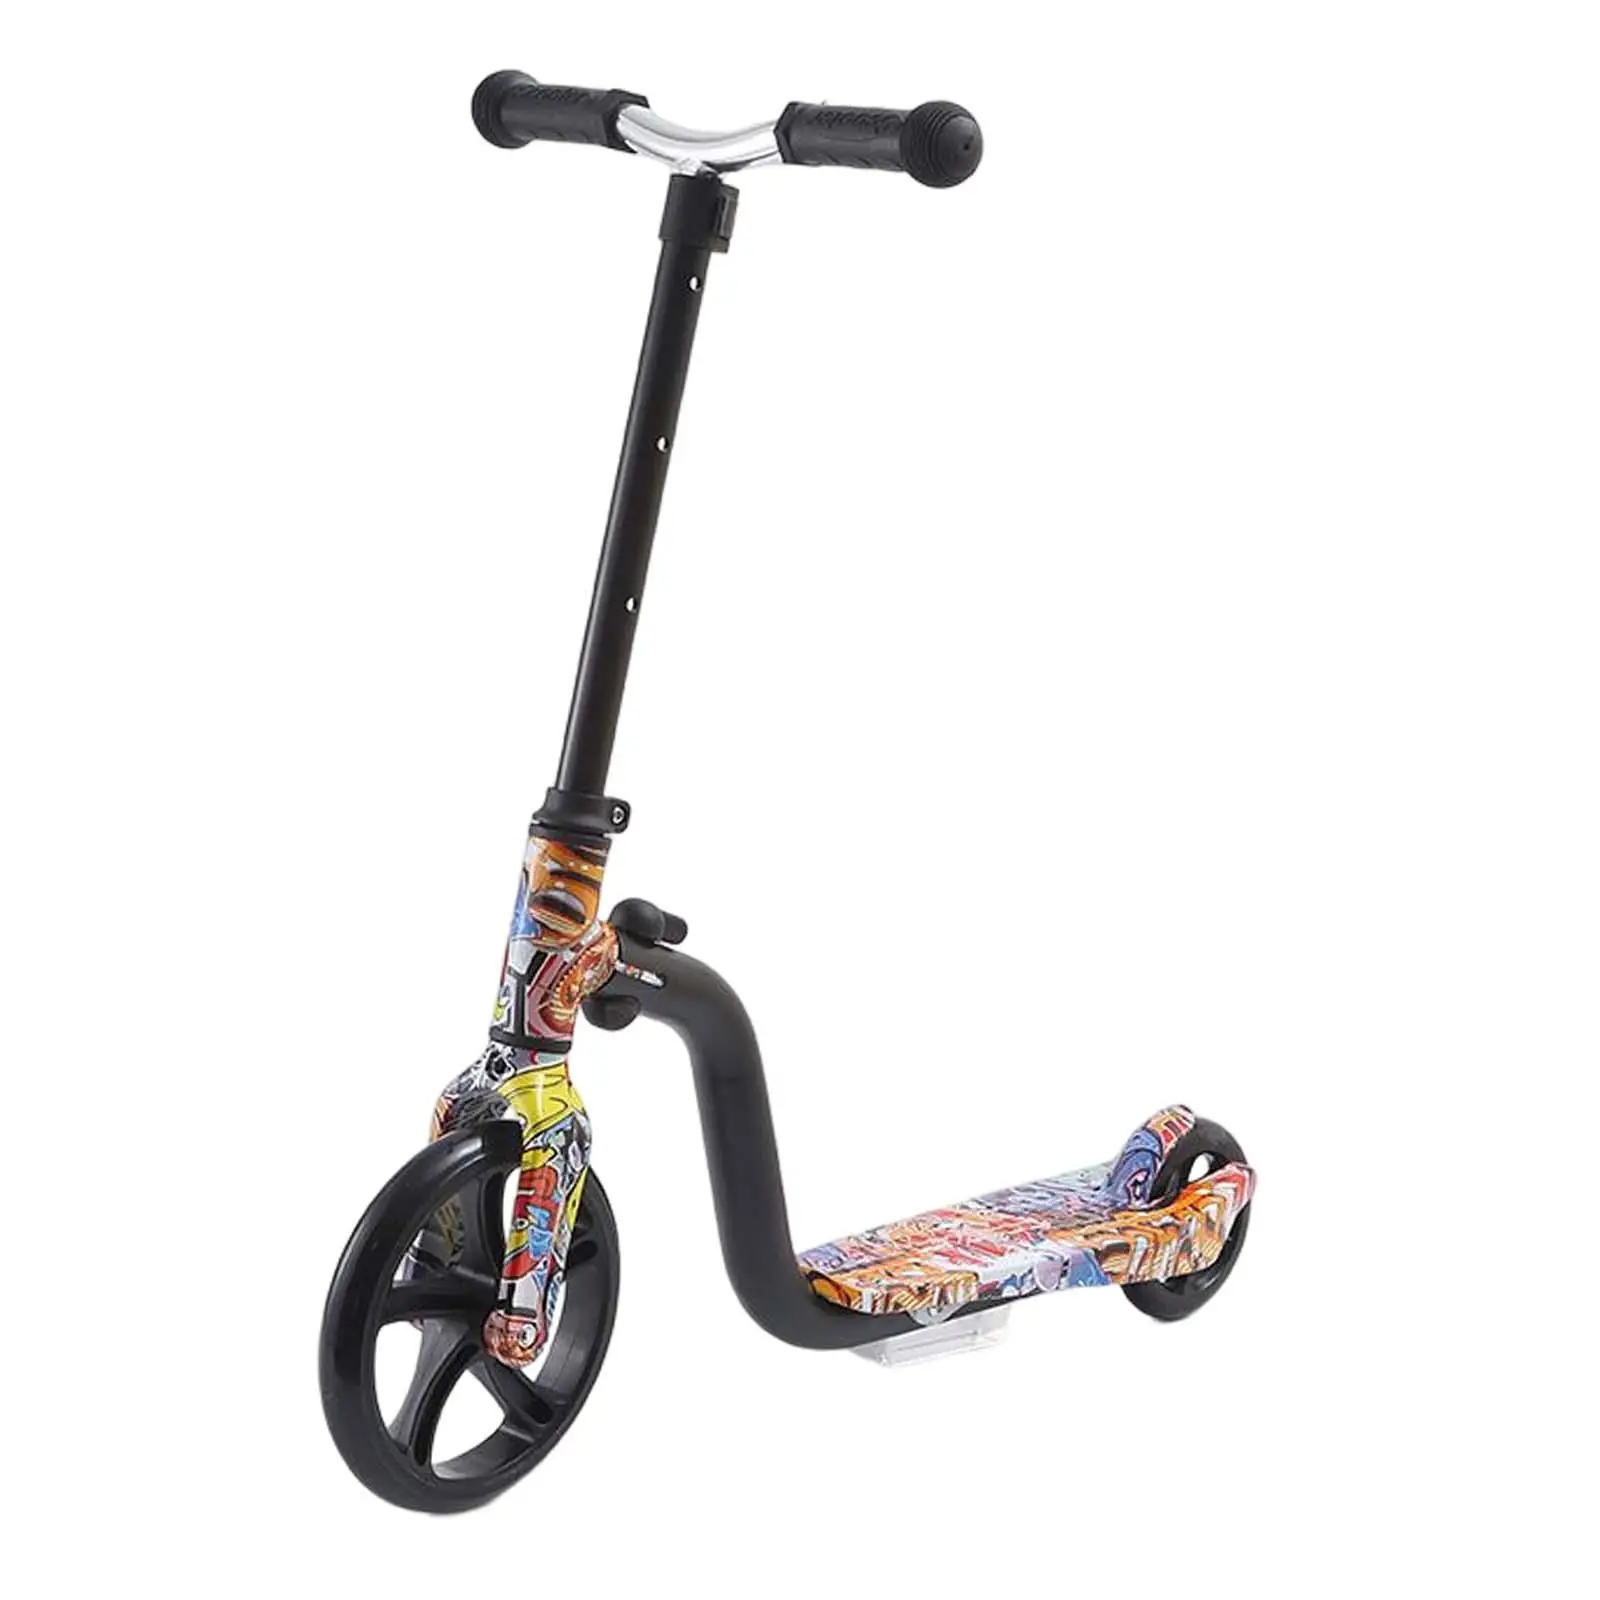 Kids Scooter Foldable Exercise Toys Scooter Ride Toy Toddler Scooter 2 Wheel Kick Scooter Adjustable for Boys Girls